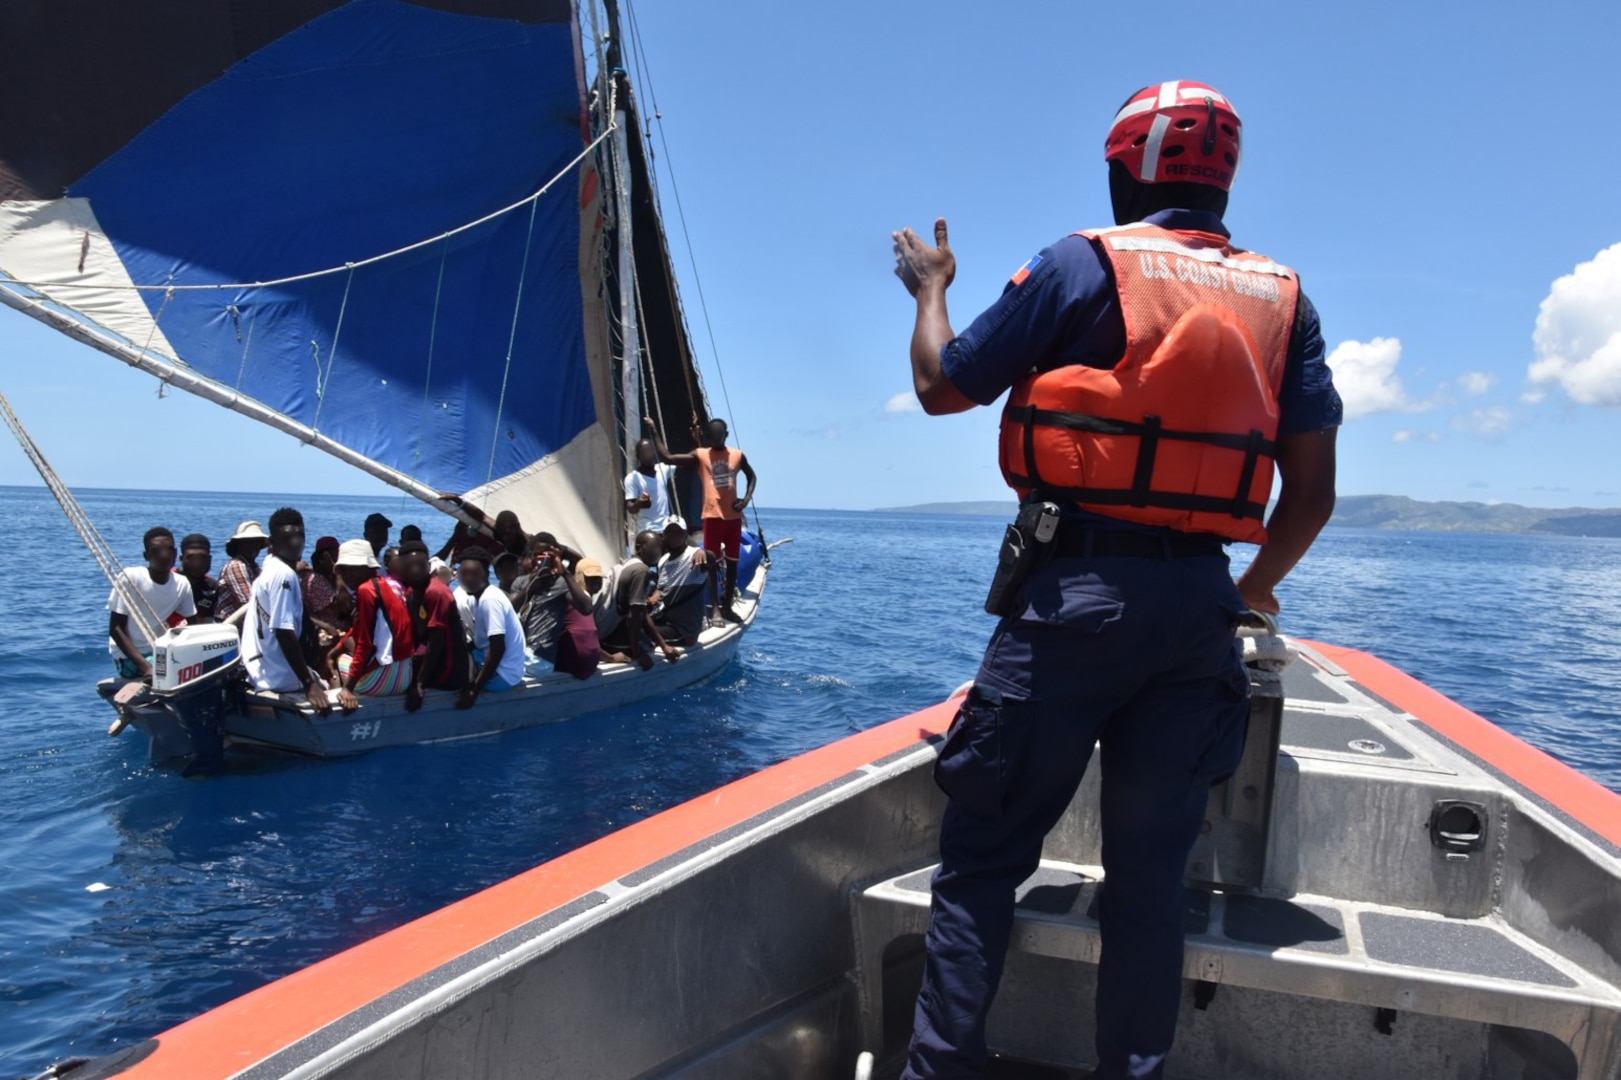 Haitian Coast Guard Officer Josue Philogene works alongside the USCGC Campbell (WMEC 909) crew to deter migrant vessel ventures at sea, April 18, 2023. While underway in the Seventh Coast Guard District’s area of responsibility, Campbell’s crew conducted maritime safety and security missions while working to detect, deter and intercept unsafe and illegal maritime migration ventures bound for the United States. (U.S. Coast Guard photo by Petty Officer 2nd Class Stephen Touchton)